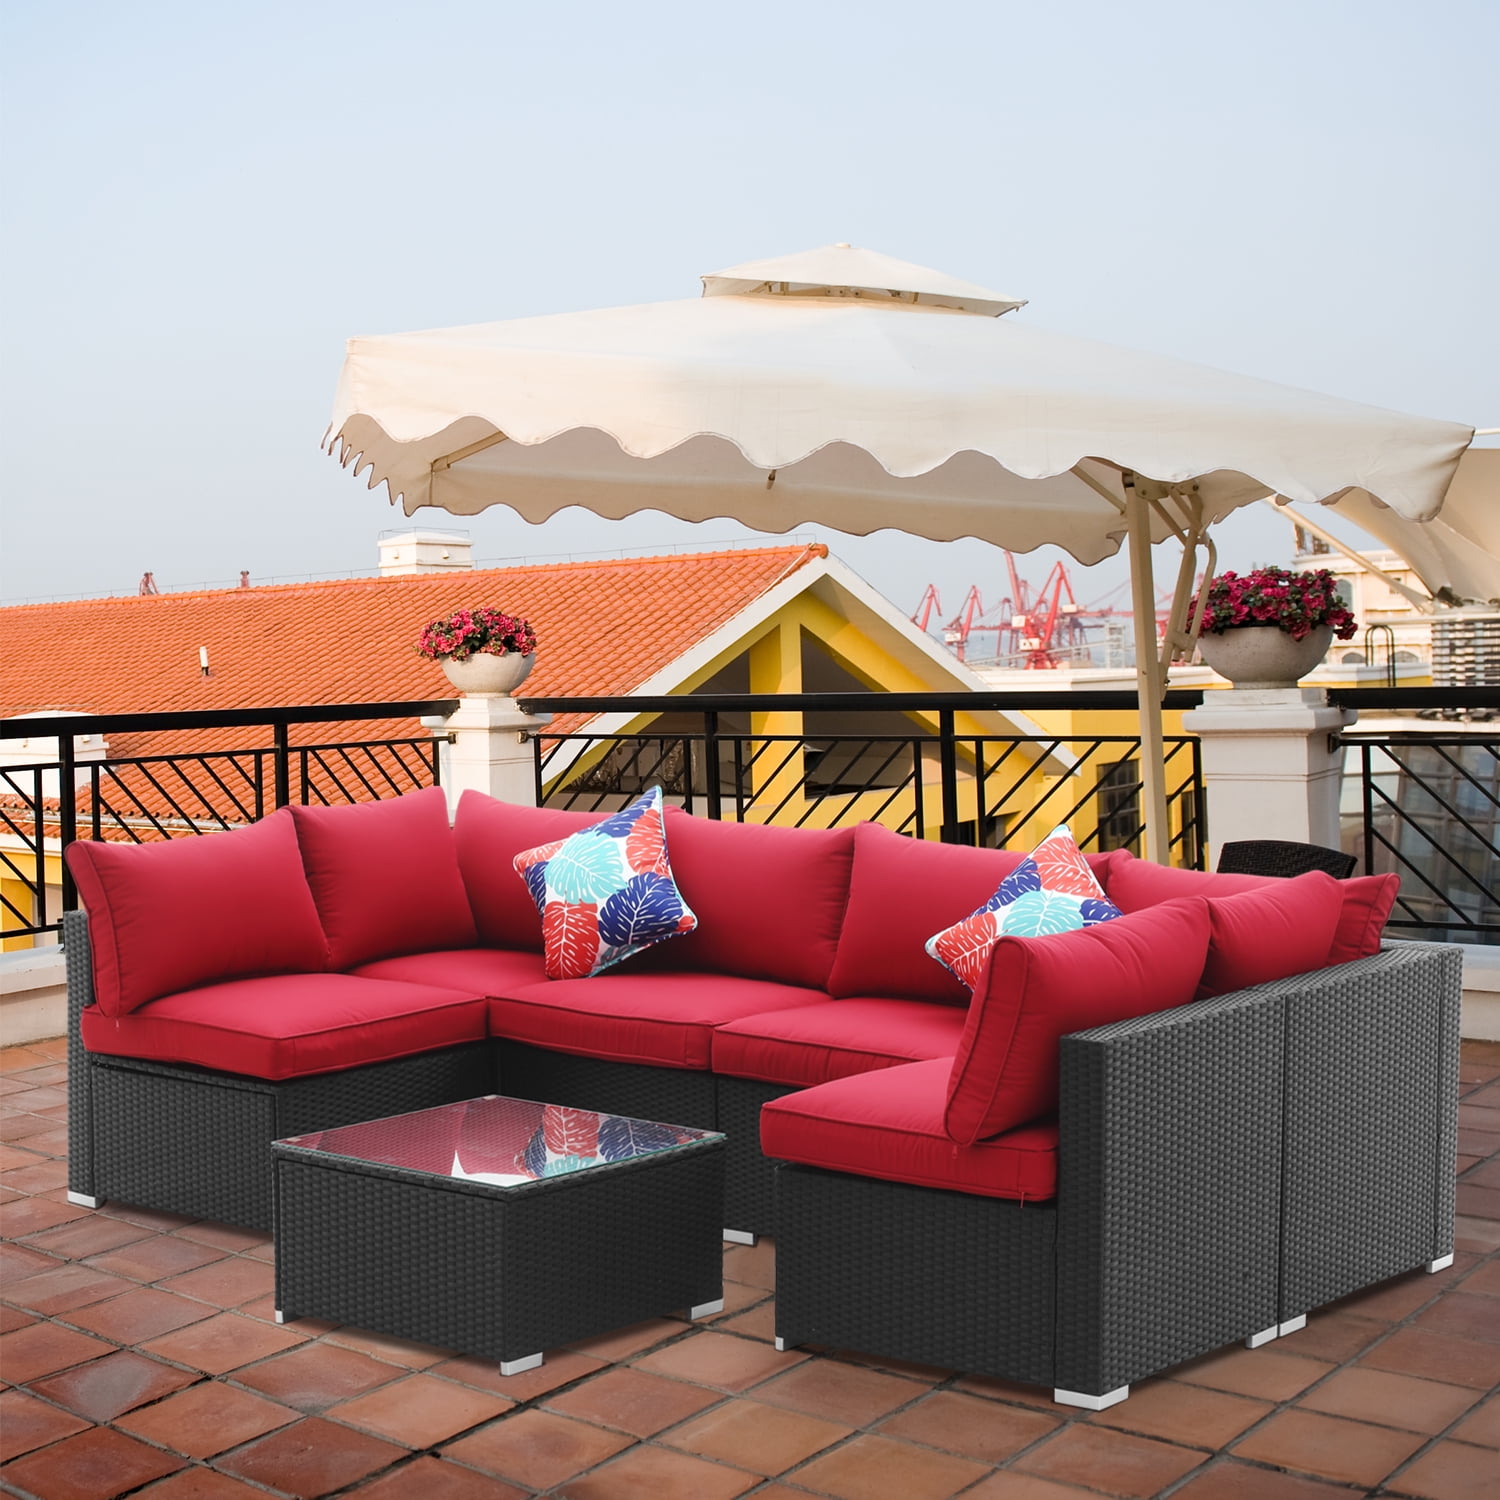 Details about   3 PCS Patio Furniture Sets Wicker Rattan Ricker Sectional Armchairs Cushions US 